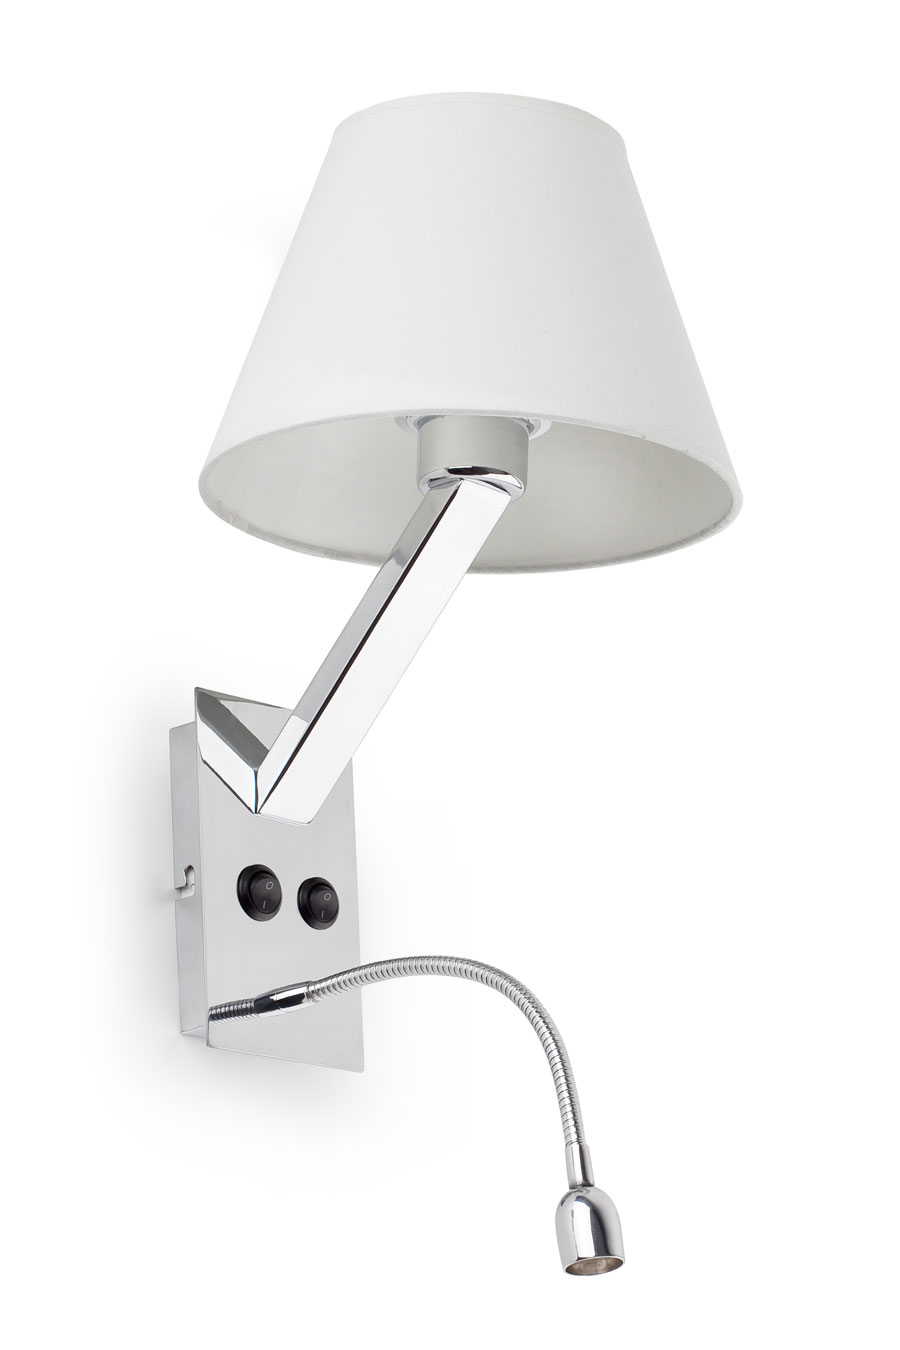 Moma 2 chrome and white fabric designer wall light with reading light. Faro. 